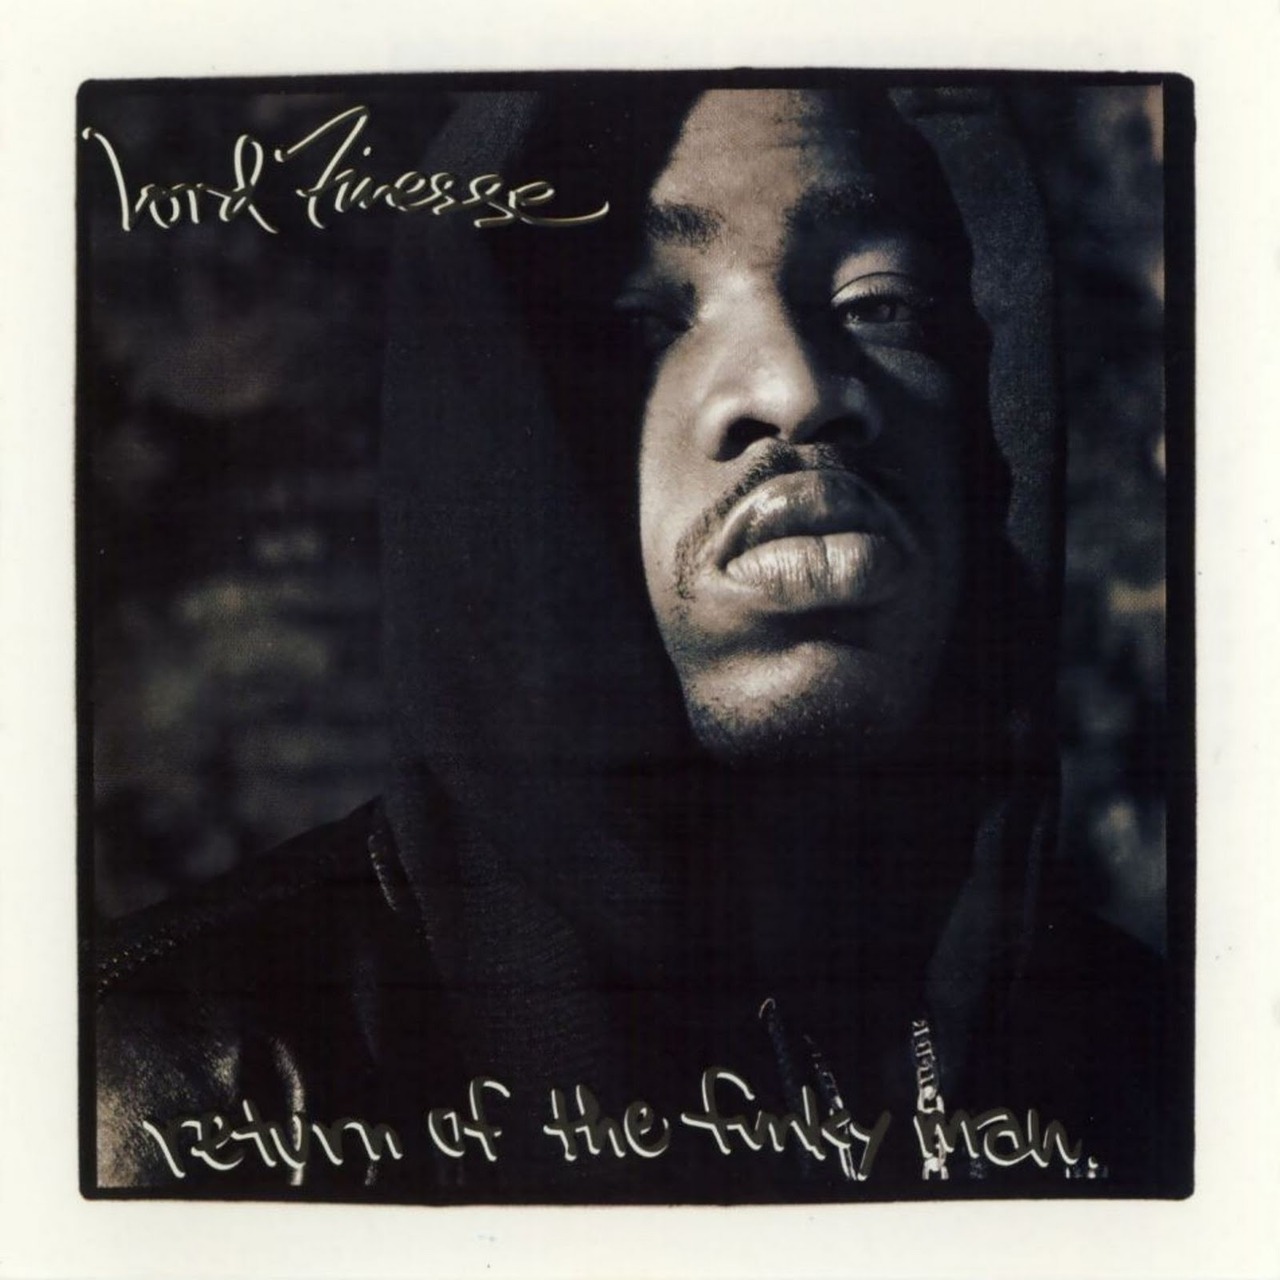 BACK IN THE DAY |1/28/92| Lord Finesse releases his second album, Return of the Funky